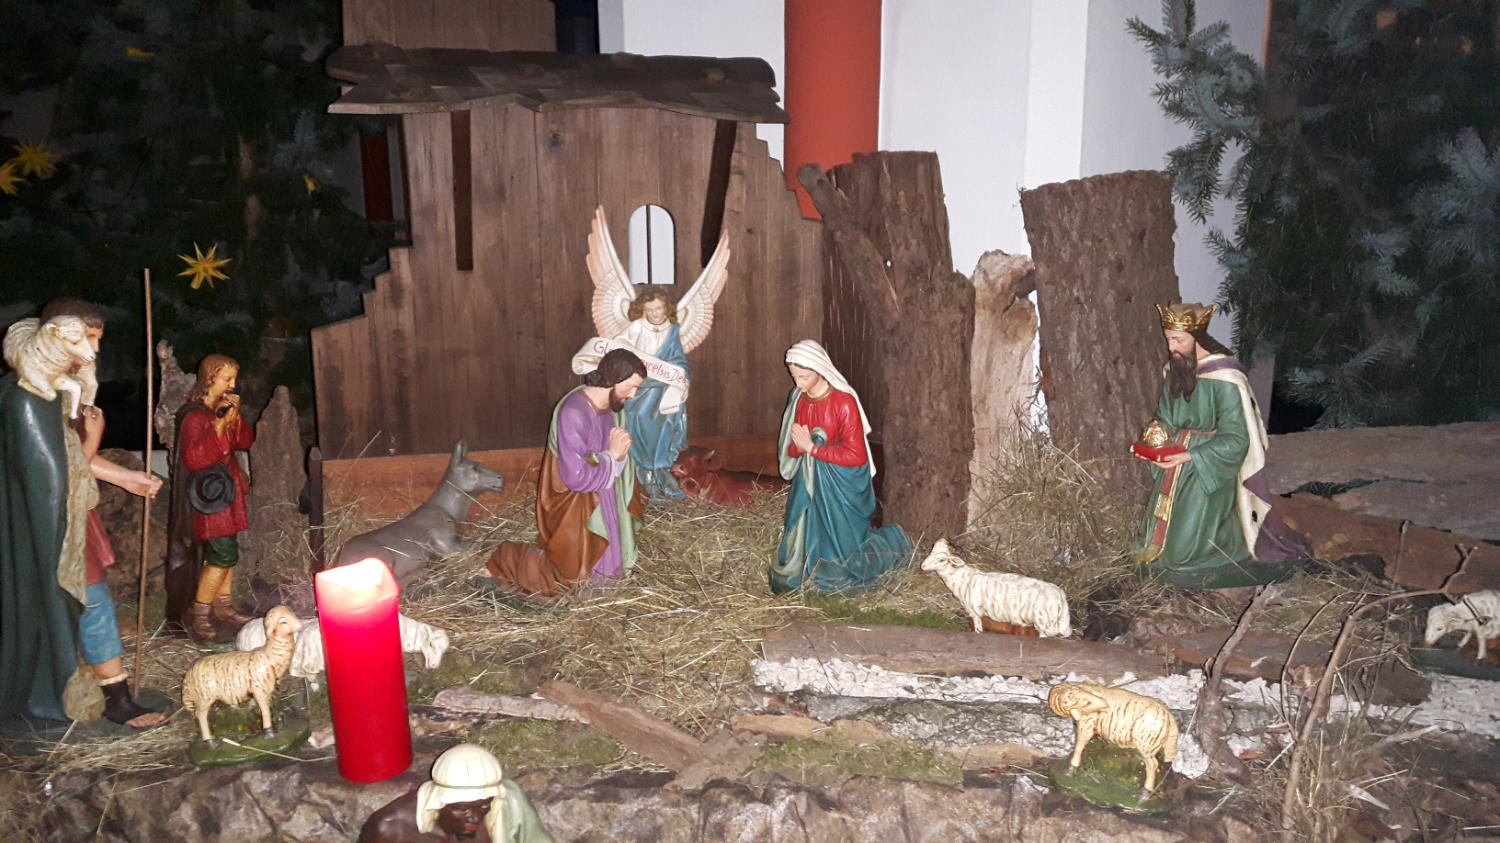 Figures and Characters of the Manger, Representation of the Birth of Jesus